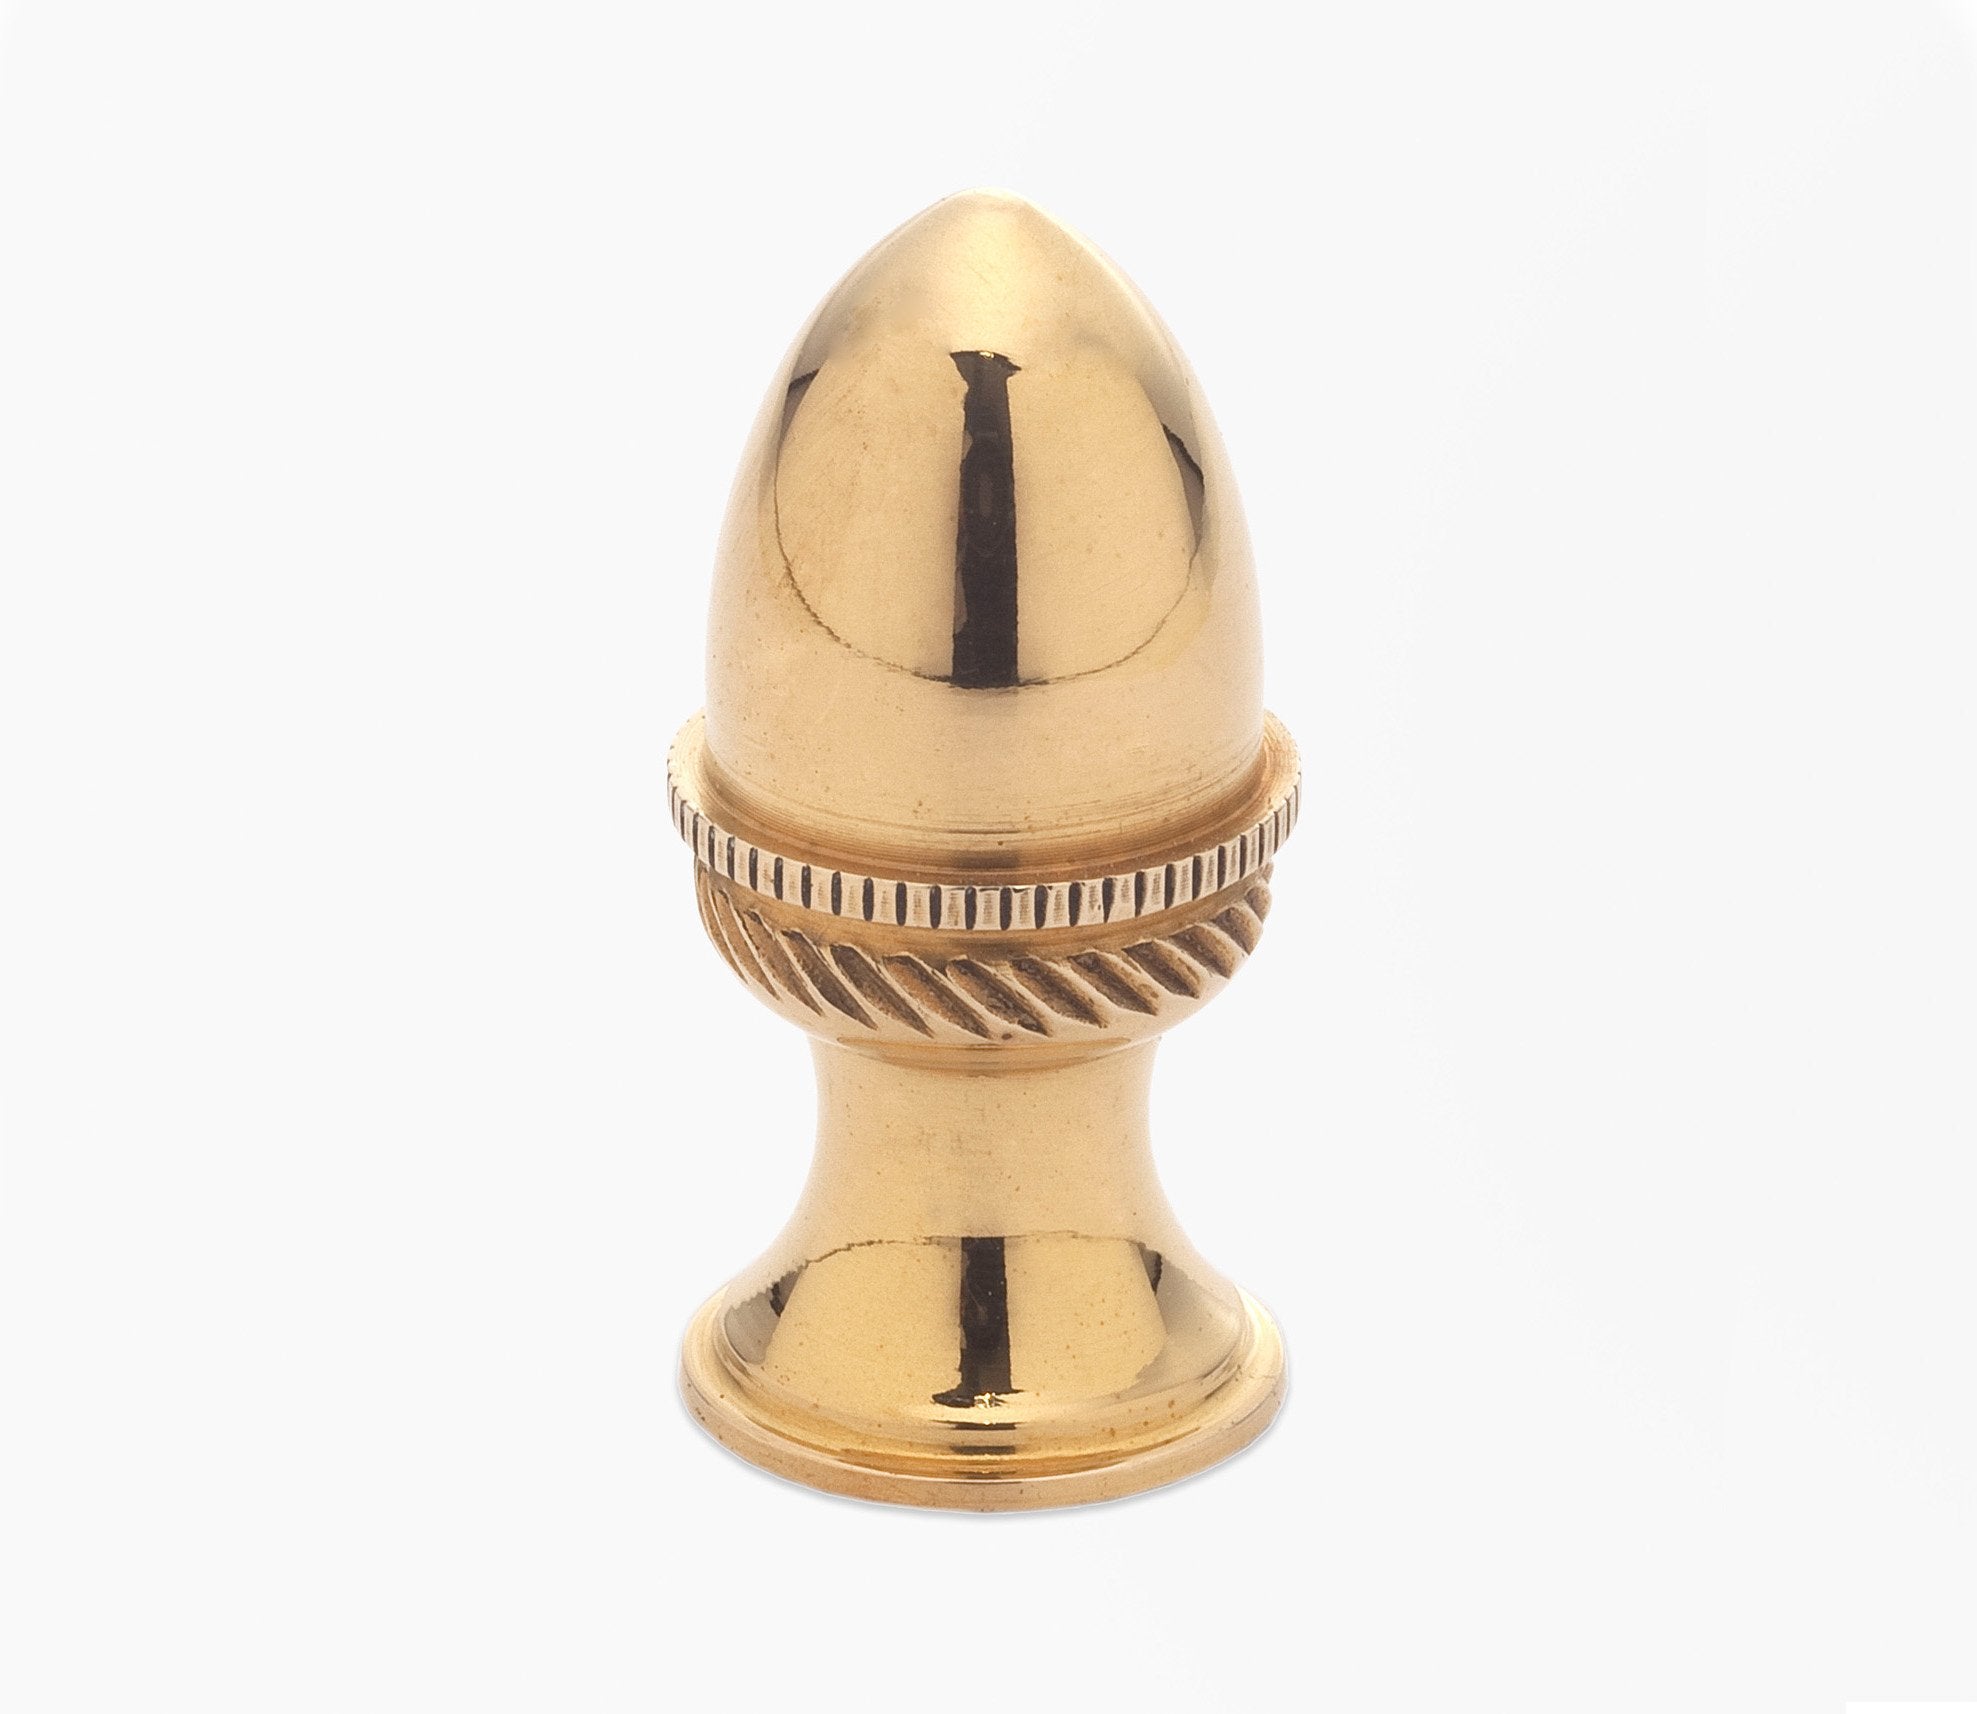 Finial 111 Small Product Image 1